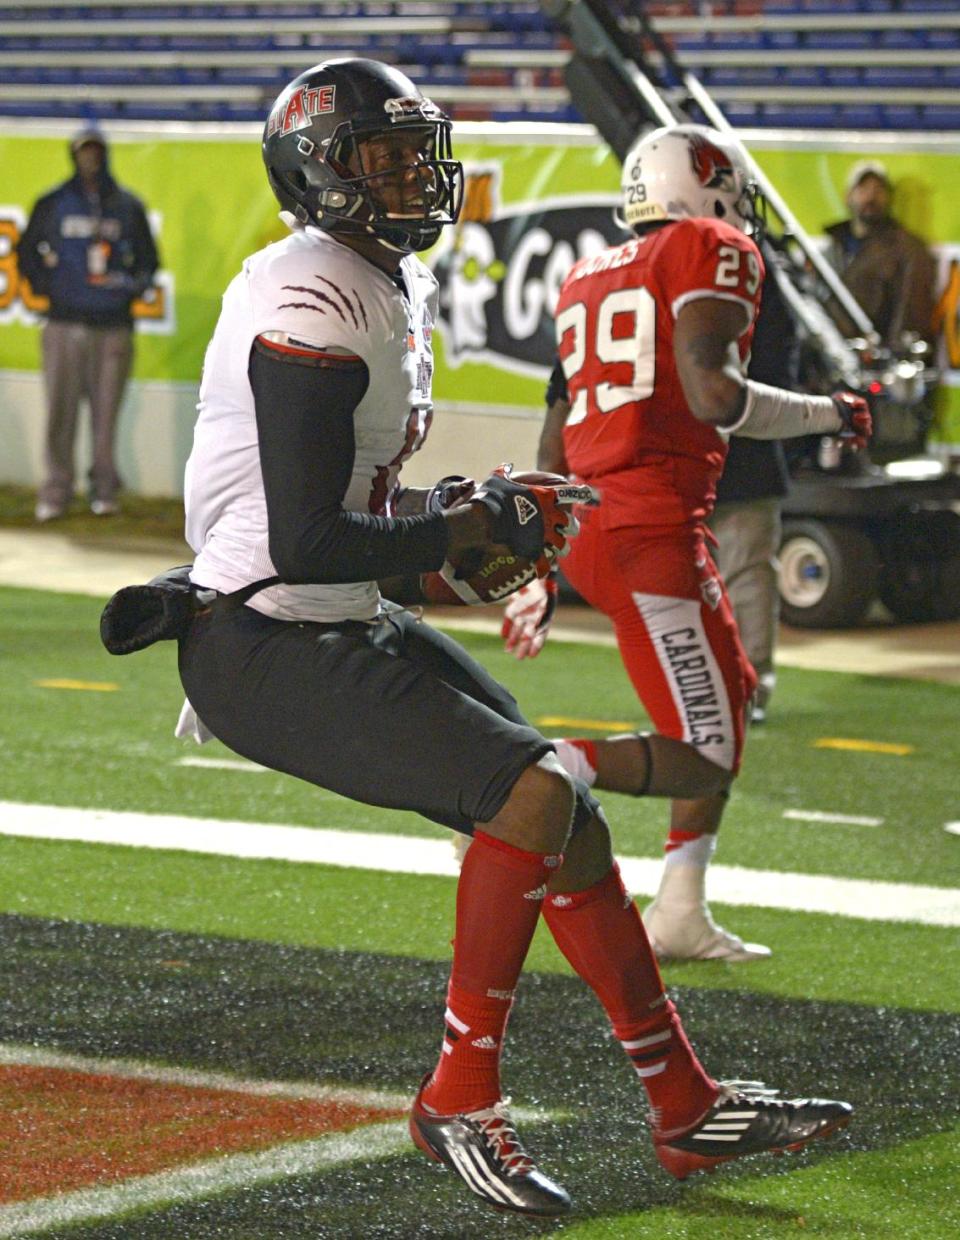 Arkansas State wide receiver Allen Muse (17) reacts after catching a pass for the winning touchdown against Ball State in the fourth quarter of the GoDaddy Bowl NCAA college football game in Mobile, Ala., Sunday, Jan. 5, 2014. (AP Photo/G.M. Andrews)